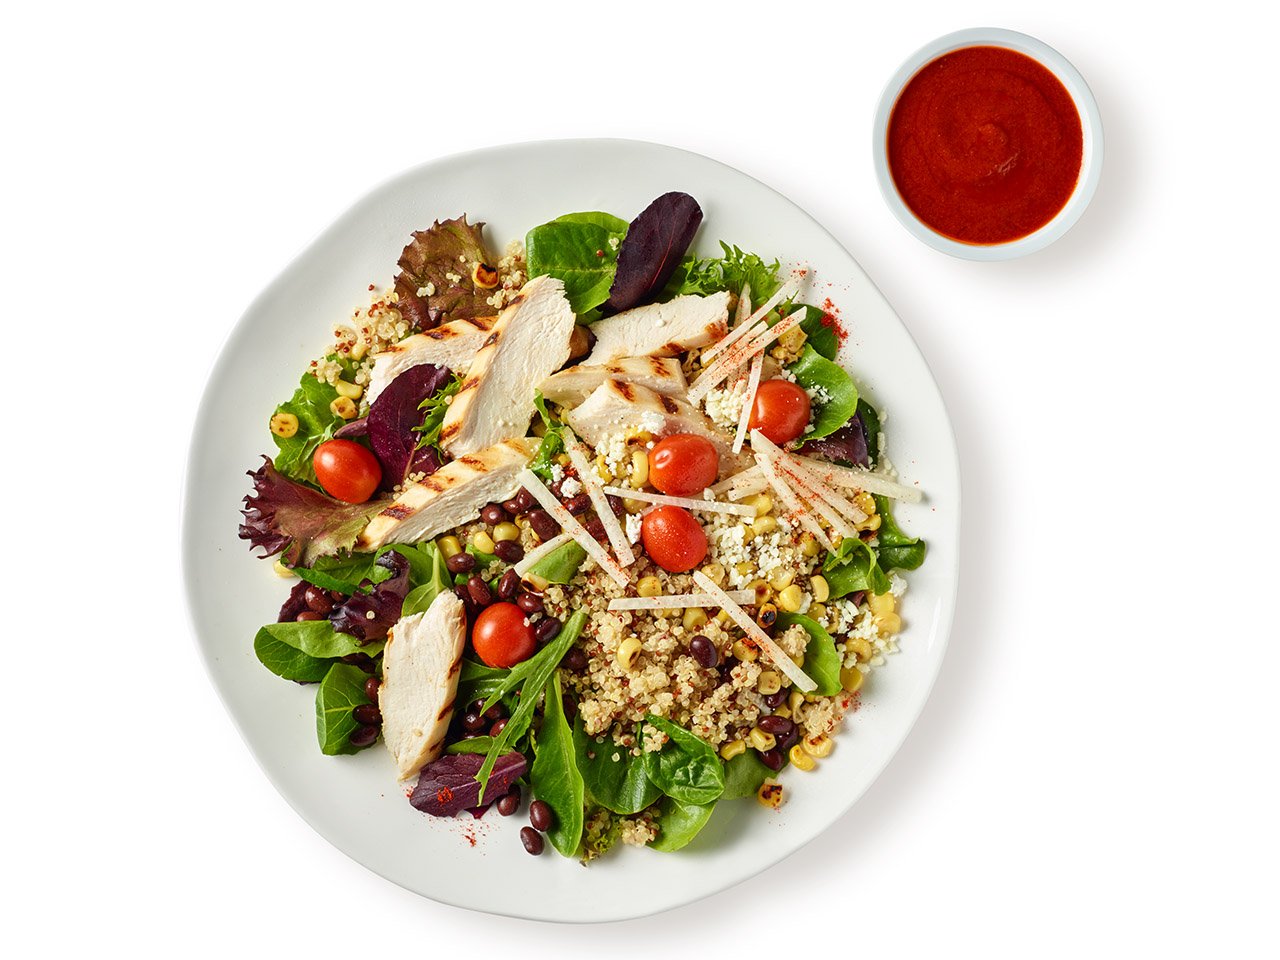 Chicken & Quinoa Protein Bowl with red sauce on side — healthiest items to order at starbucks